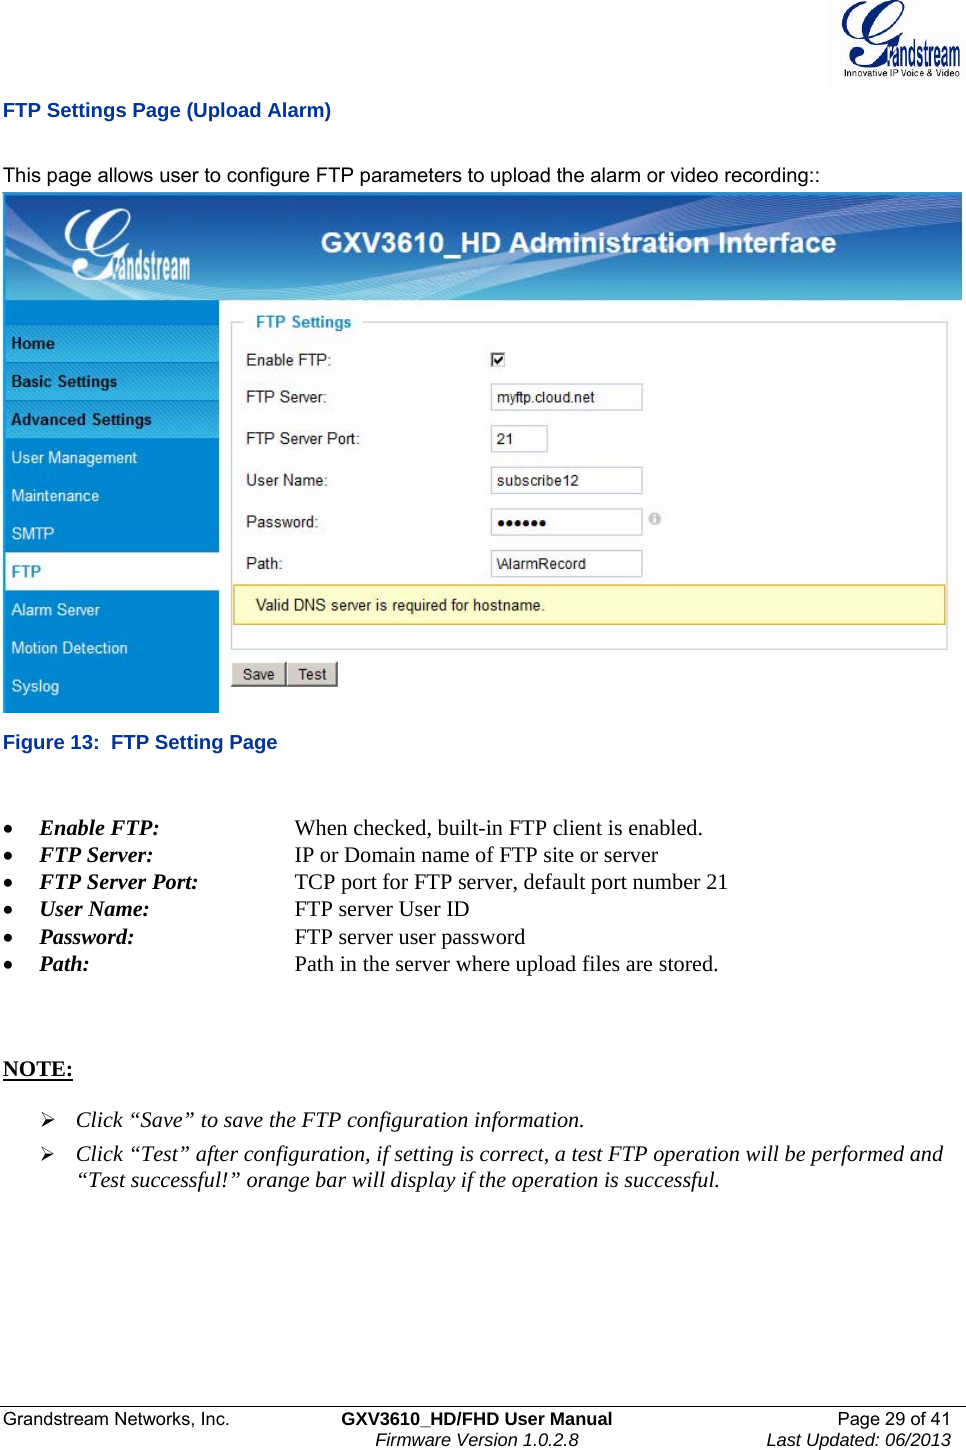  Grandstream Networks, Inc.  GXV3610_HD/FHD User Manual  Page 29 of 41    Firmware Version 1.0.2.8  Last Updated: 06/2013  FTP Settings Page (Upload Alarm)  This page allows user to configure FTP parameters to upload the alarm or video recording::  Figure 13:  FTP Setting Page  • Enable FTP:     When checked, built-in FTP client is enabled.  • FTP Server:     IP or Domain name of FTP site or server • FTP Server Port:     TCP port for FTP server, default port number 21 • User Name:     FTP server User ID • Password:      FTP server user password • Path:       Path in the server where upload files are stored.     NOTE:   ¾ Click “Save” to save the FTP configuration information. ¾ Click “Test” after configuration, if setting is correct, a test FTP operation will be performed and “Test successful!” orange bar will display if the operation is successful.  